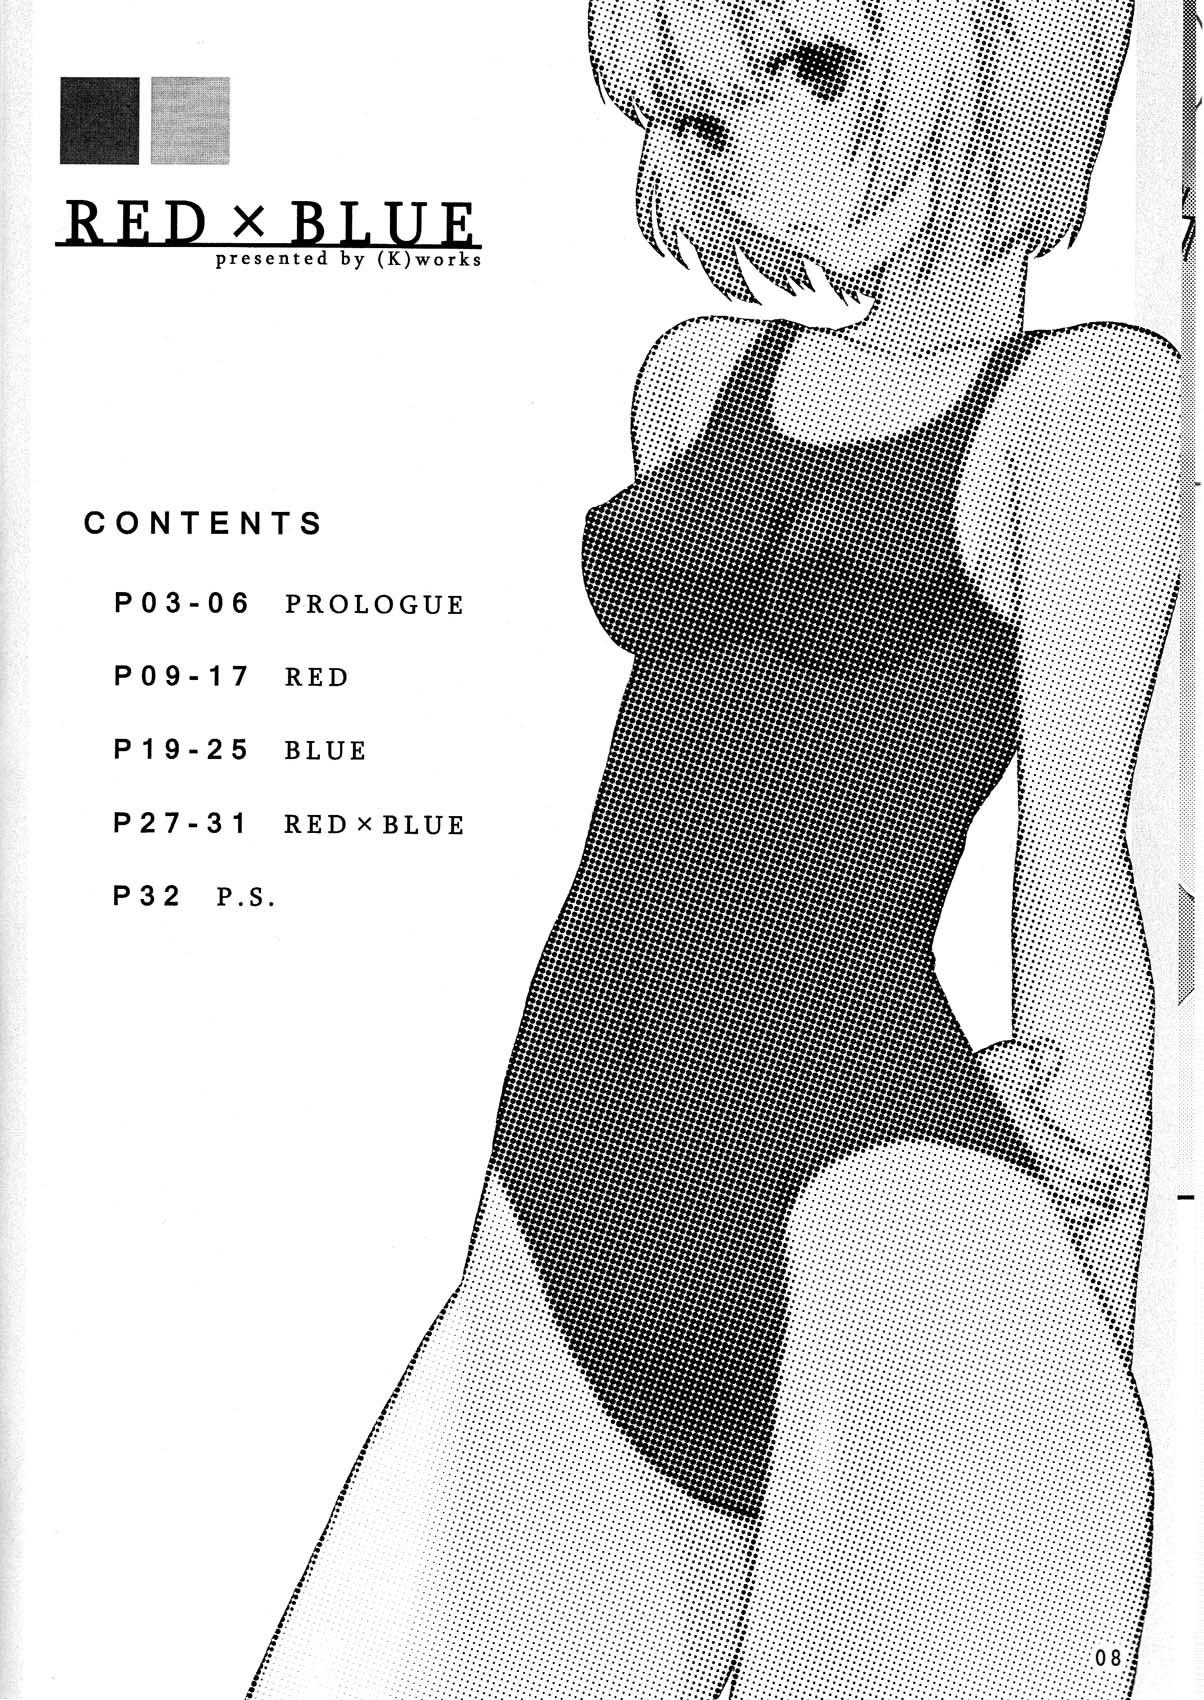 Girl Girl Red X Blue - Neon genesis evangelion Free Amateur Porn - Page 8